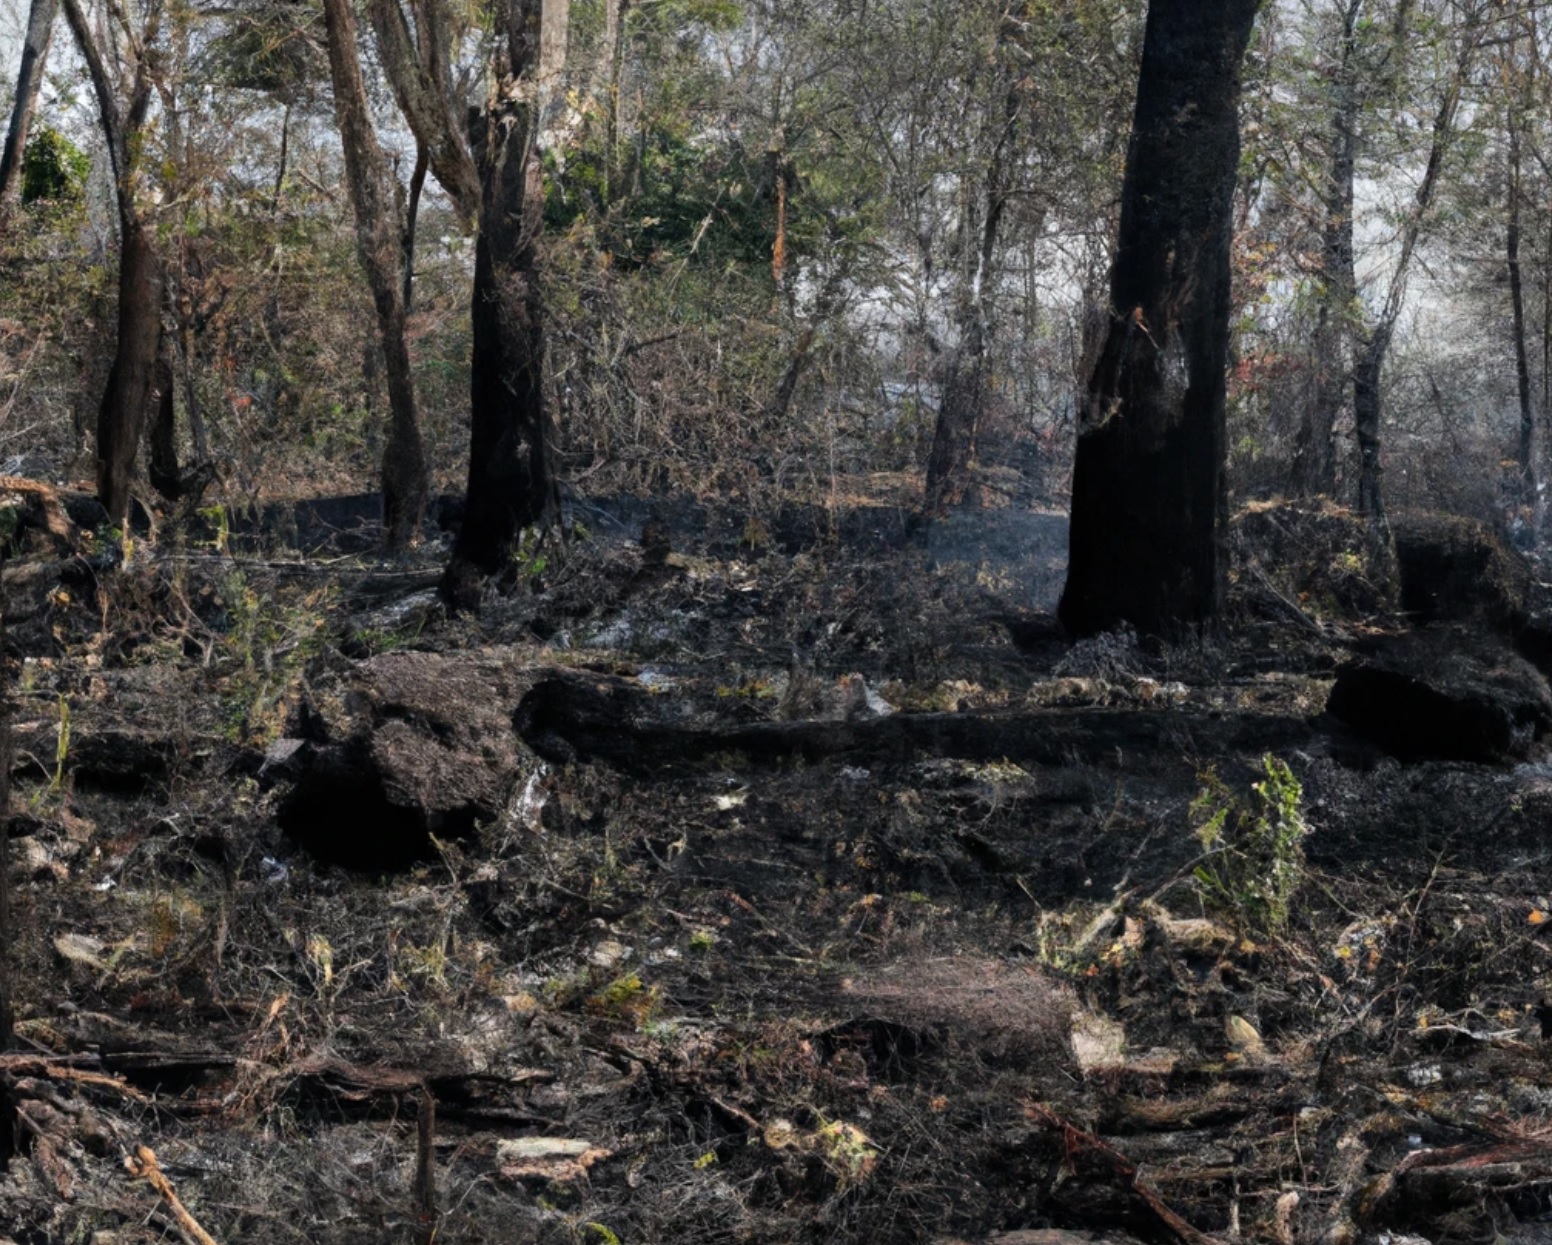 Shows a forest, which is burnt down.